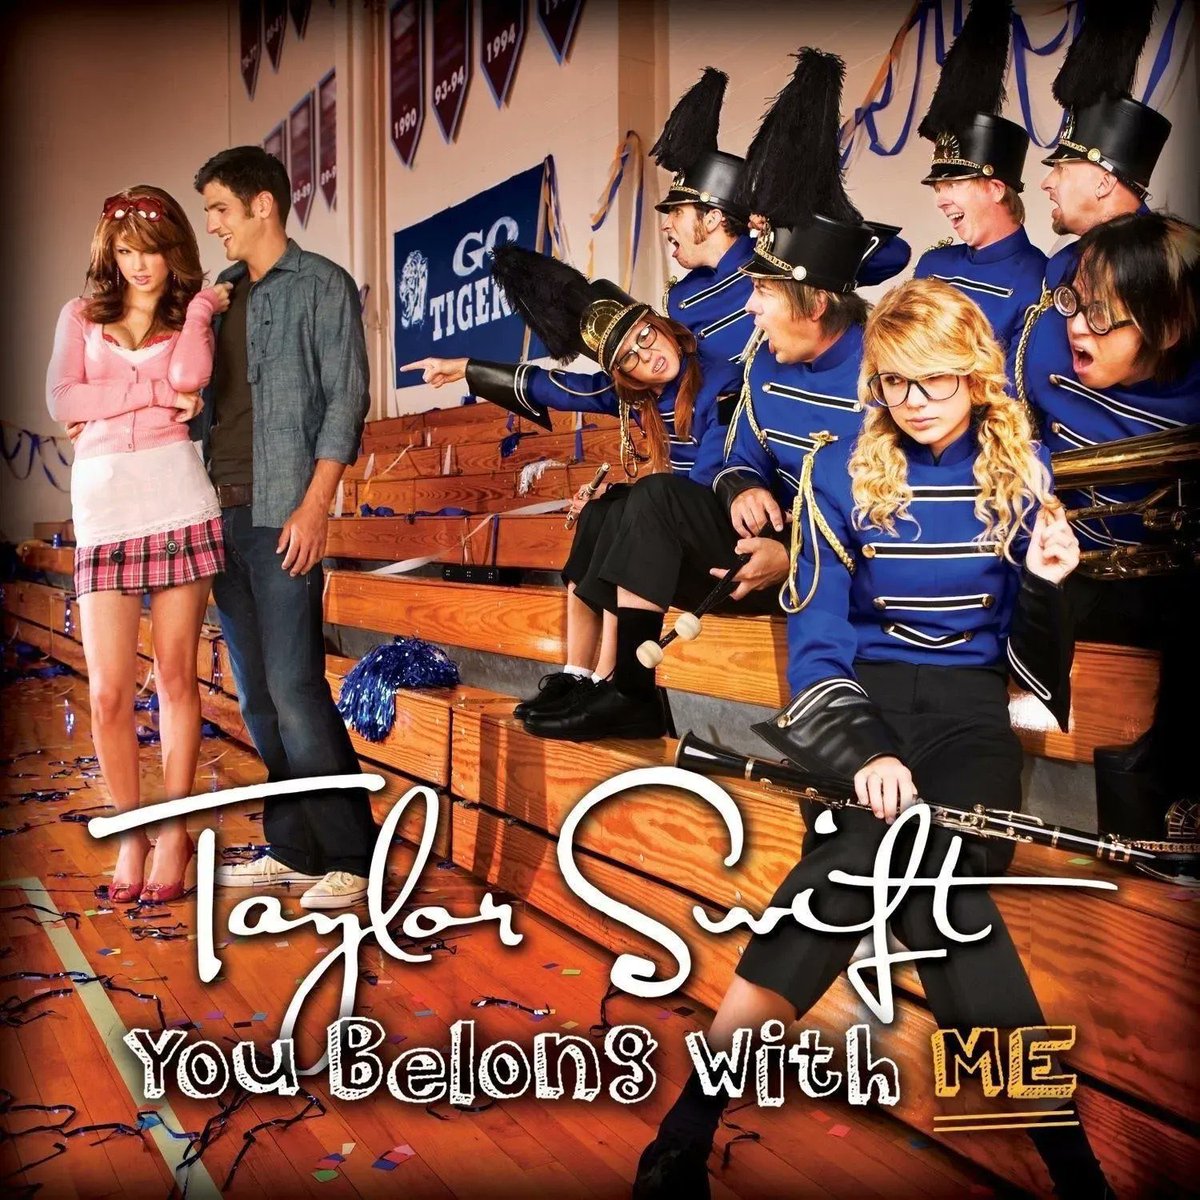 “You Belong With Me (Taylor’s Version)” by Taylor Swift has surpassed the original version on the song on Spotify (634 million streams).